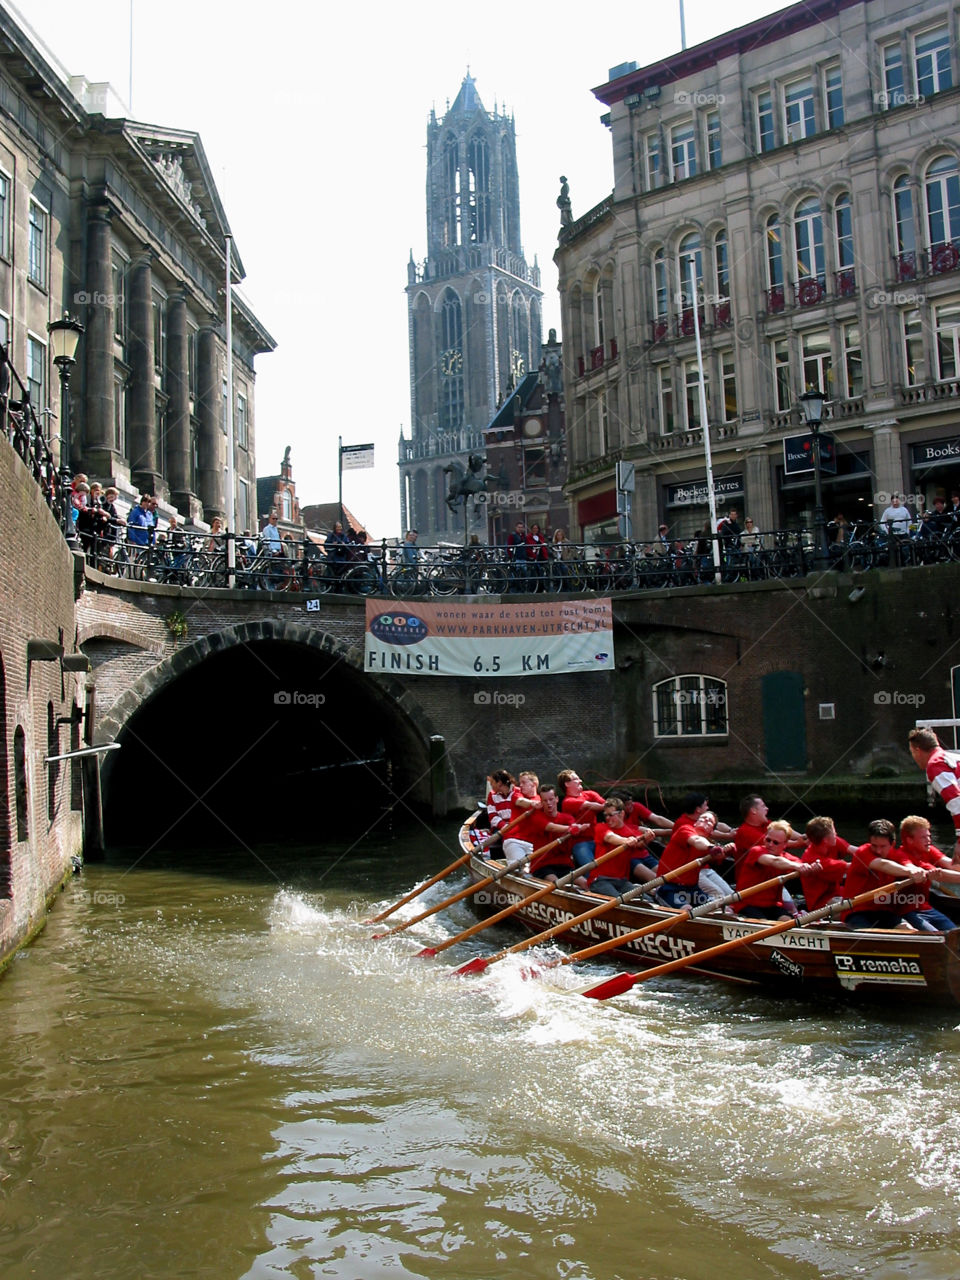 Boatrace in the old canals of Utrecht 